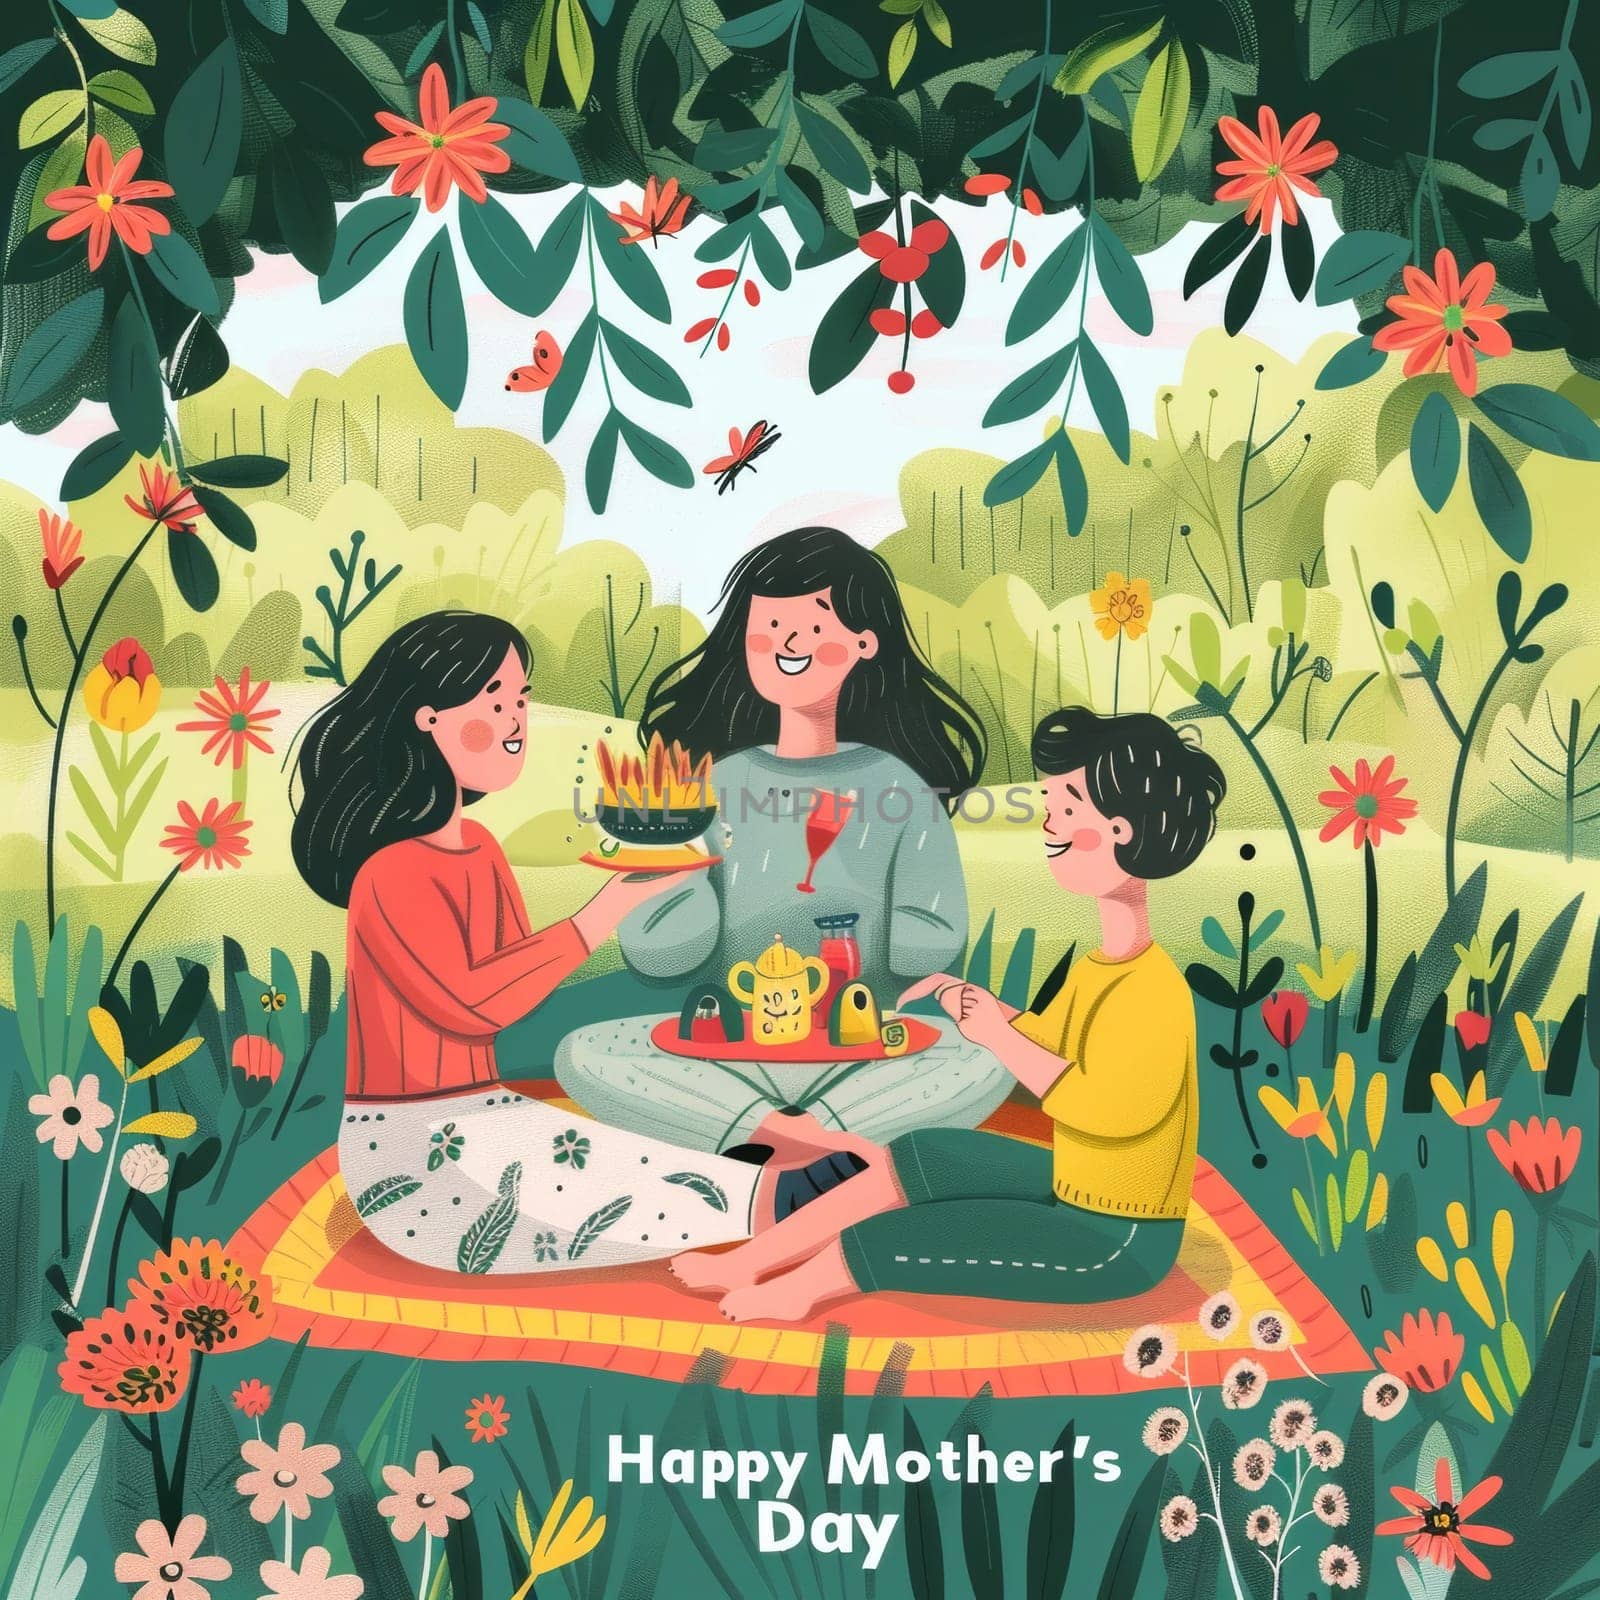 A vibrant illustration depicting a family enjoying a picnic on Mothers Day, surrounded by lush greenery and blooming flowers. by sfinks